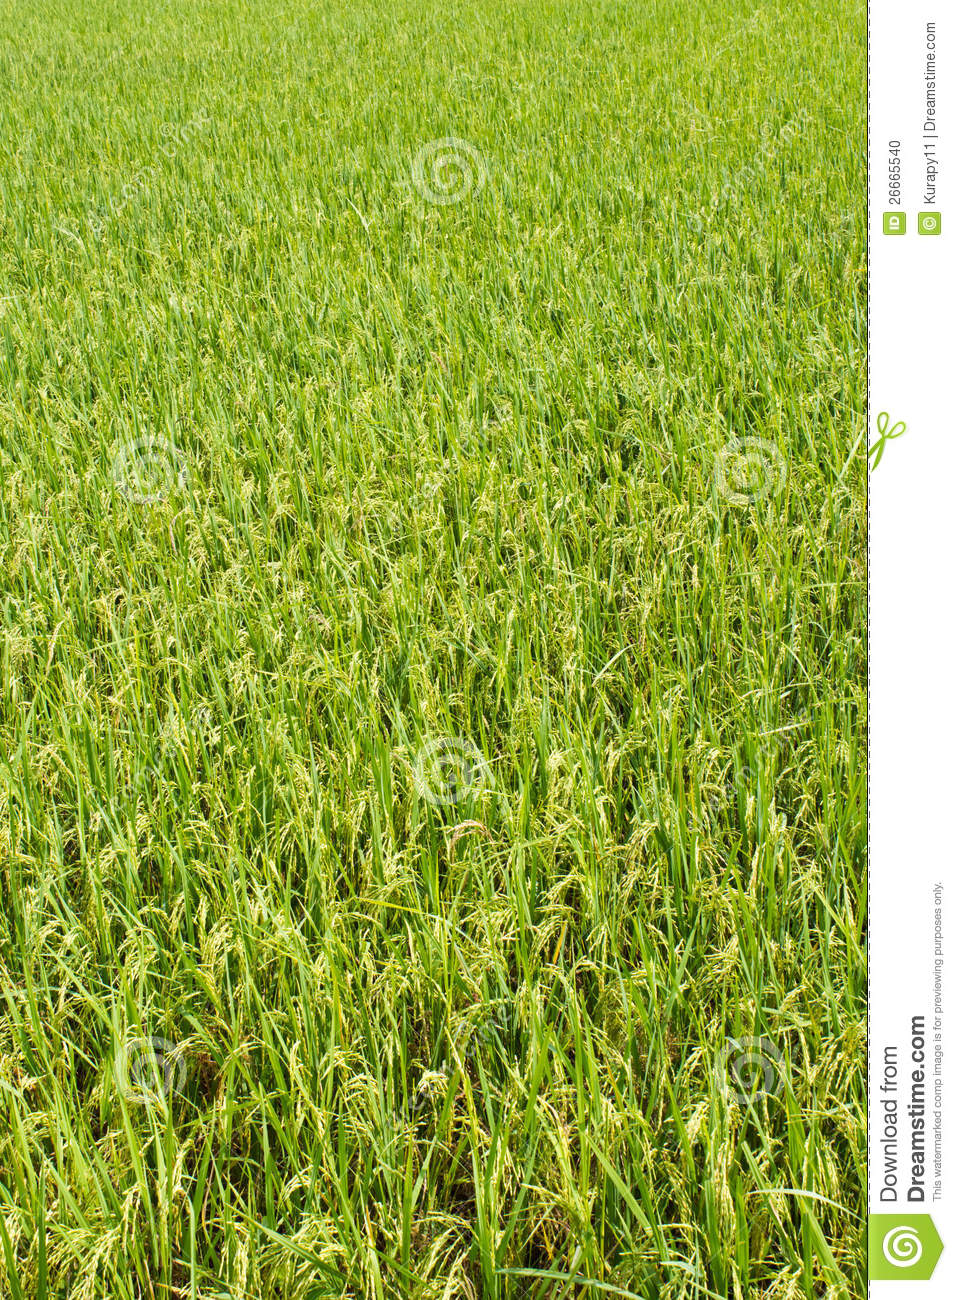 Rice Plant In Rice Field Stock Photo   Image  26665540